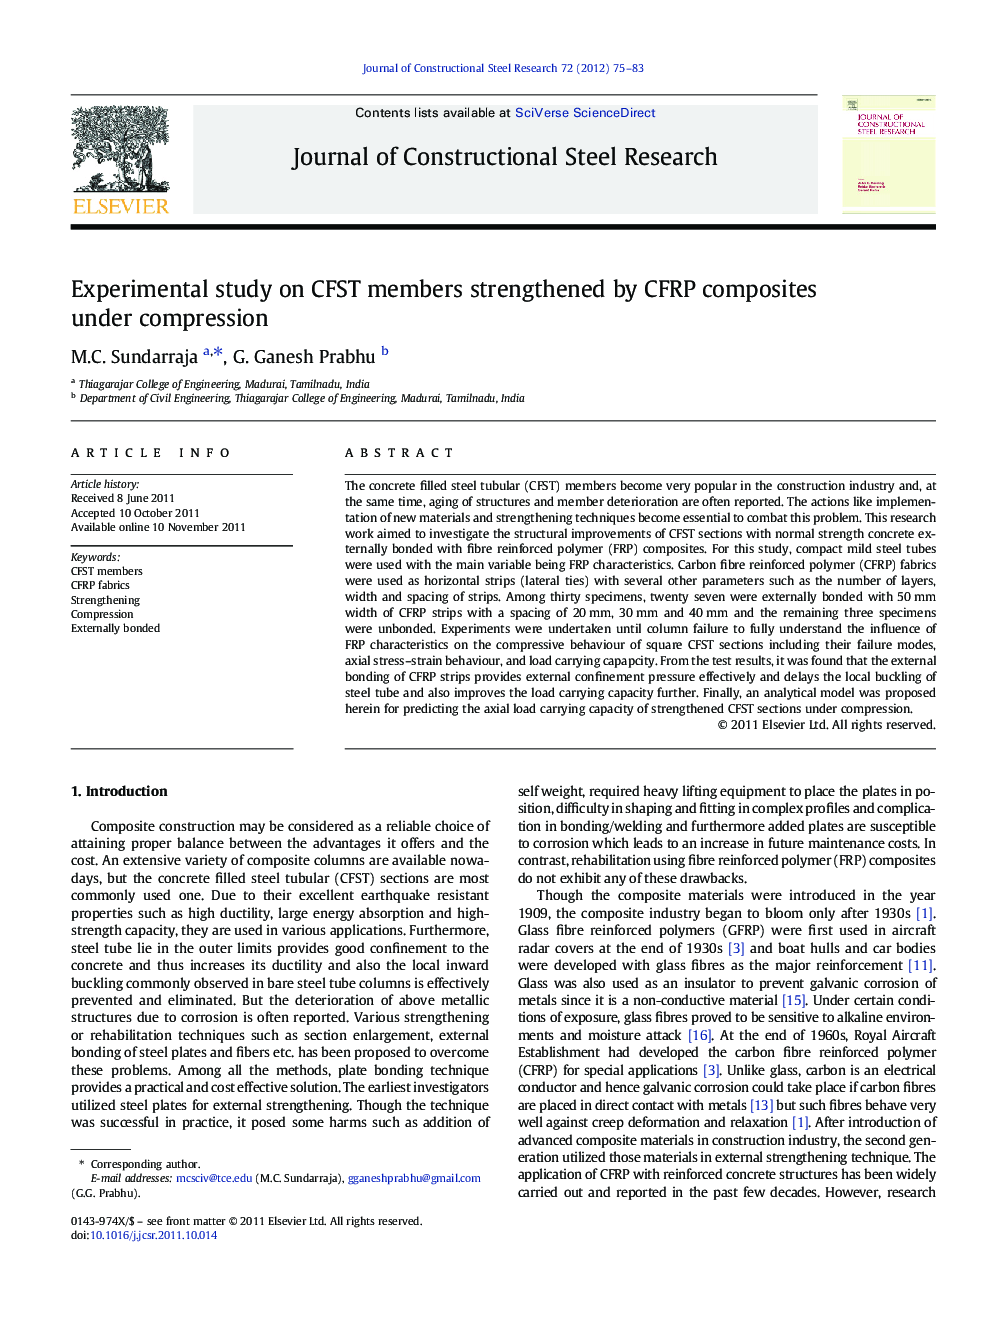 Experimental study on CFST members strengthened by CFRP composites under compression